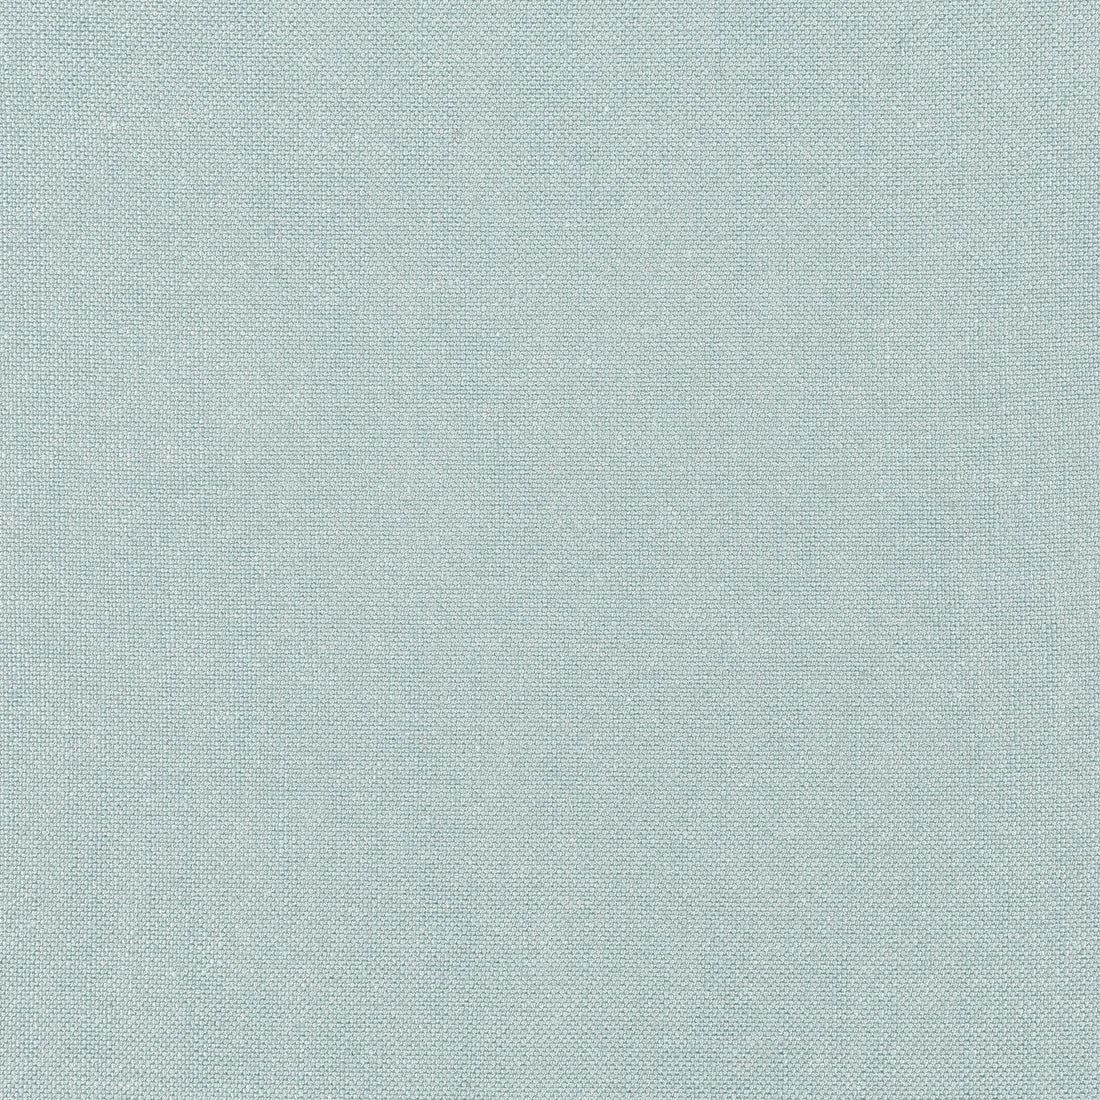 Palisade Linen fabric in horizon color - pattern number FWW7647 - by Thibaut in the Palisades collection